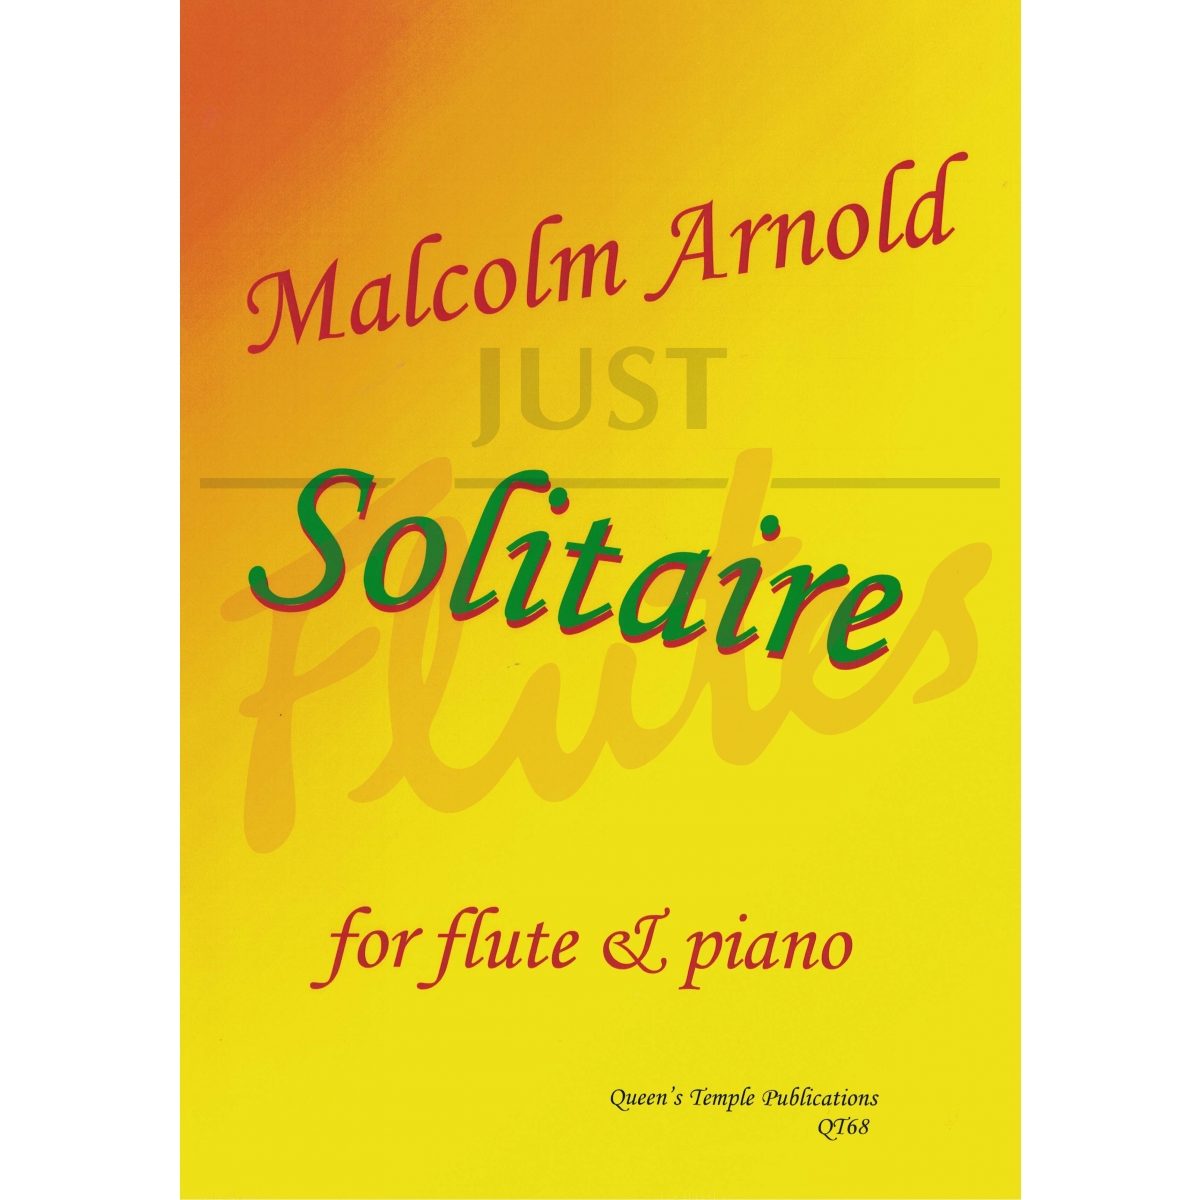 Solitaire for Flute and Piano